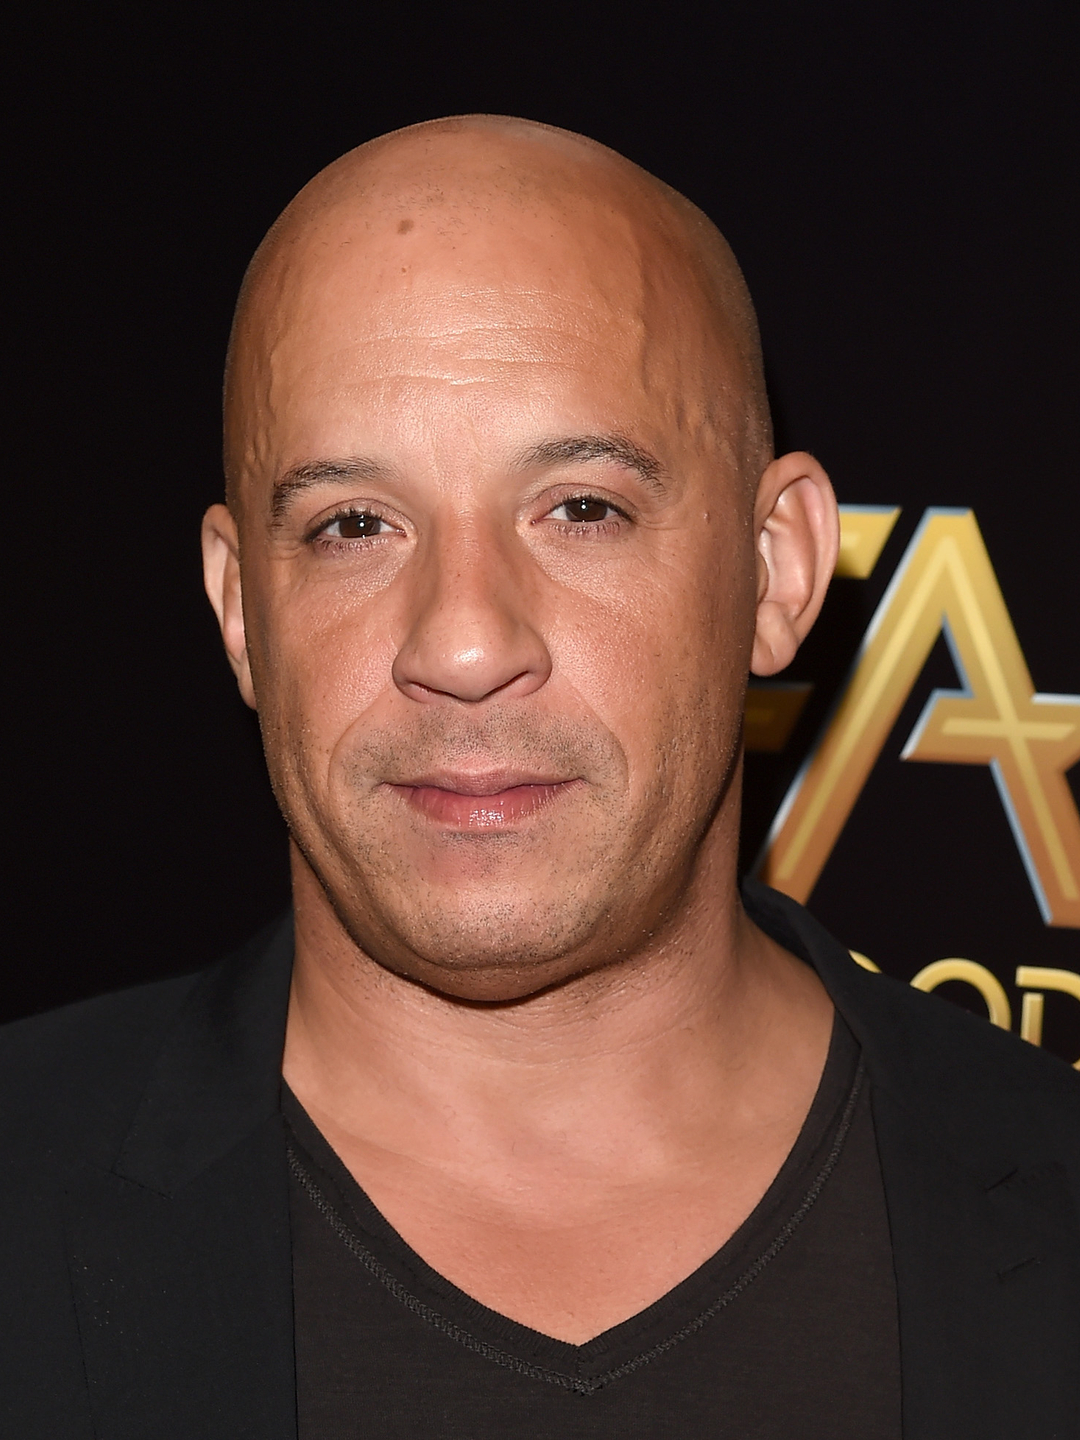 Vin Diesel young age